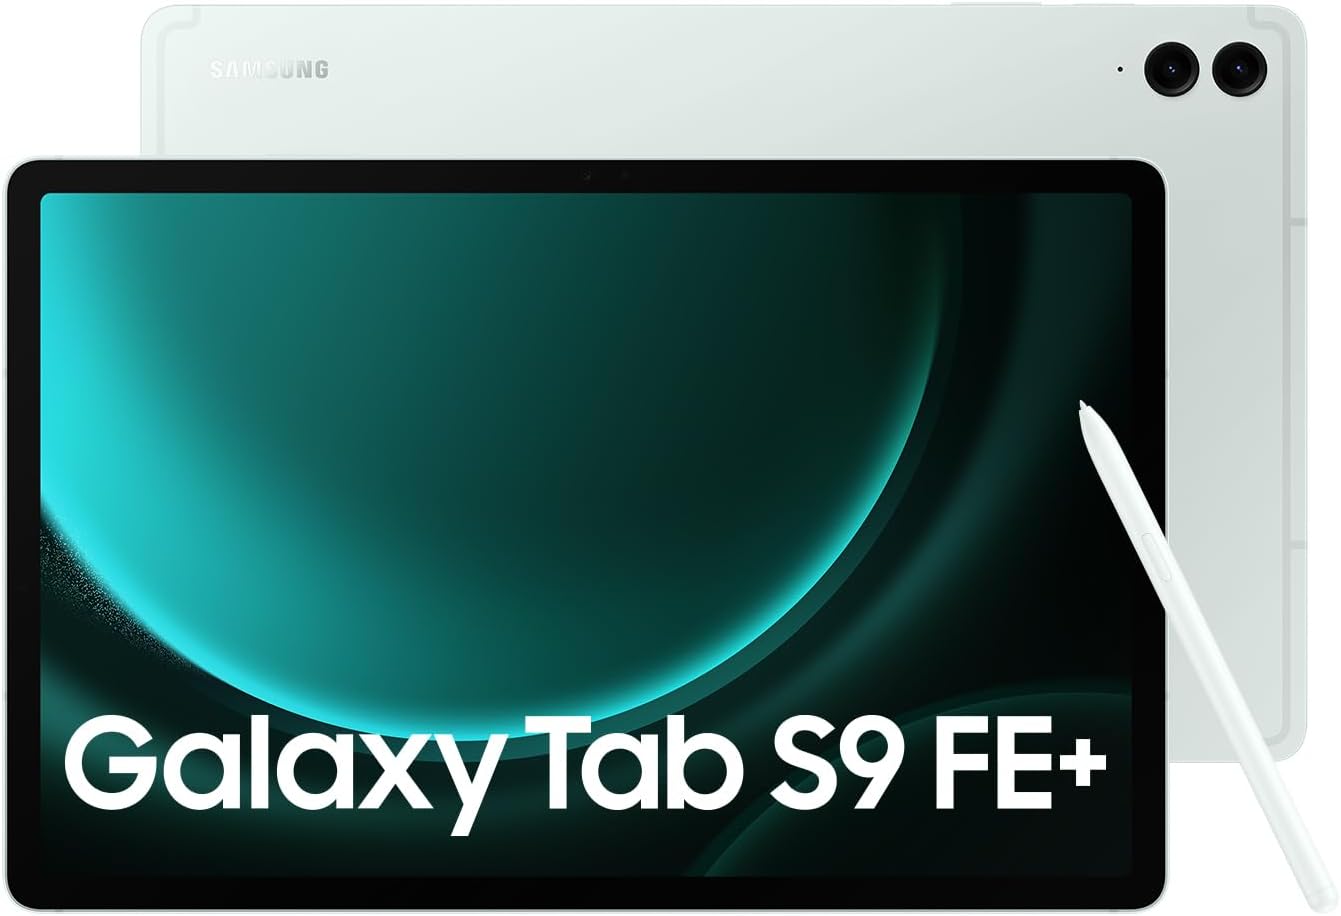 Samsung Galaxy Tab S9 FE+ 12.4 5G Android Tablet, Mint - Colorful design for creative possibilities and entertainment. 8806095170435